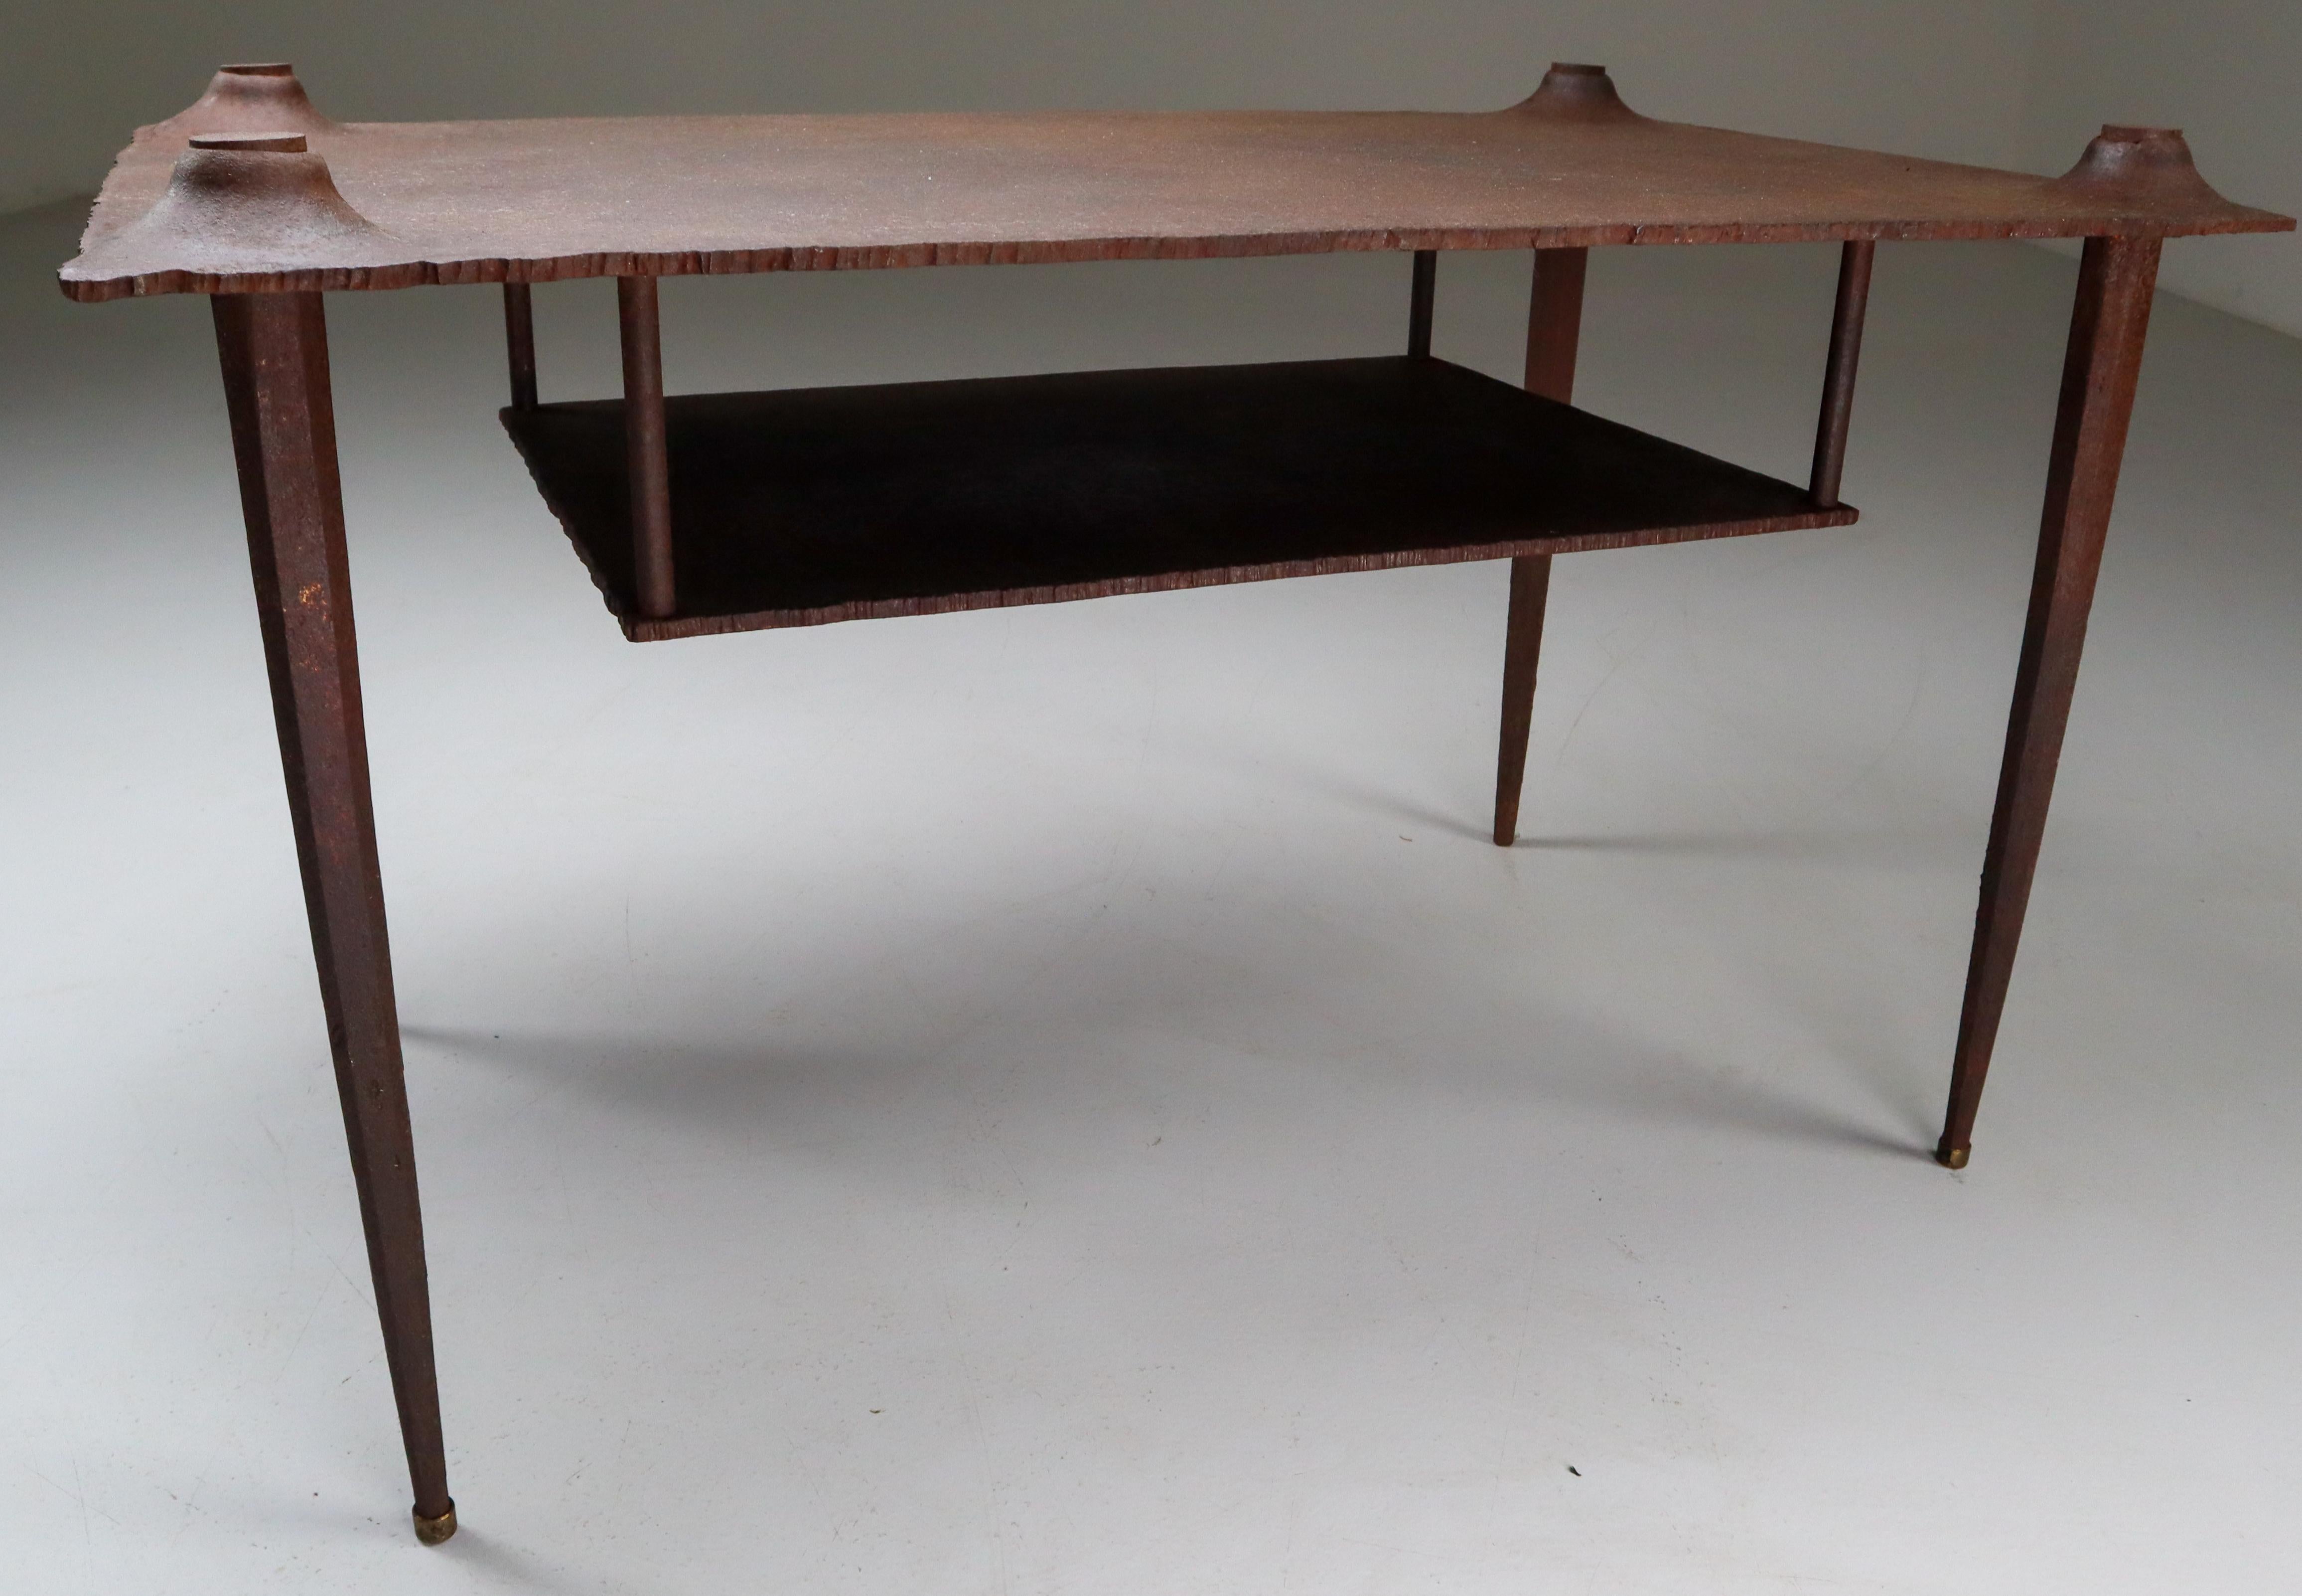 Late 20th Century Brutalist Cast Iron Table by Indir Mecibah for Smederij Moerman, Belgium, 1998